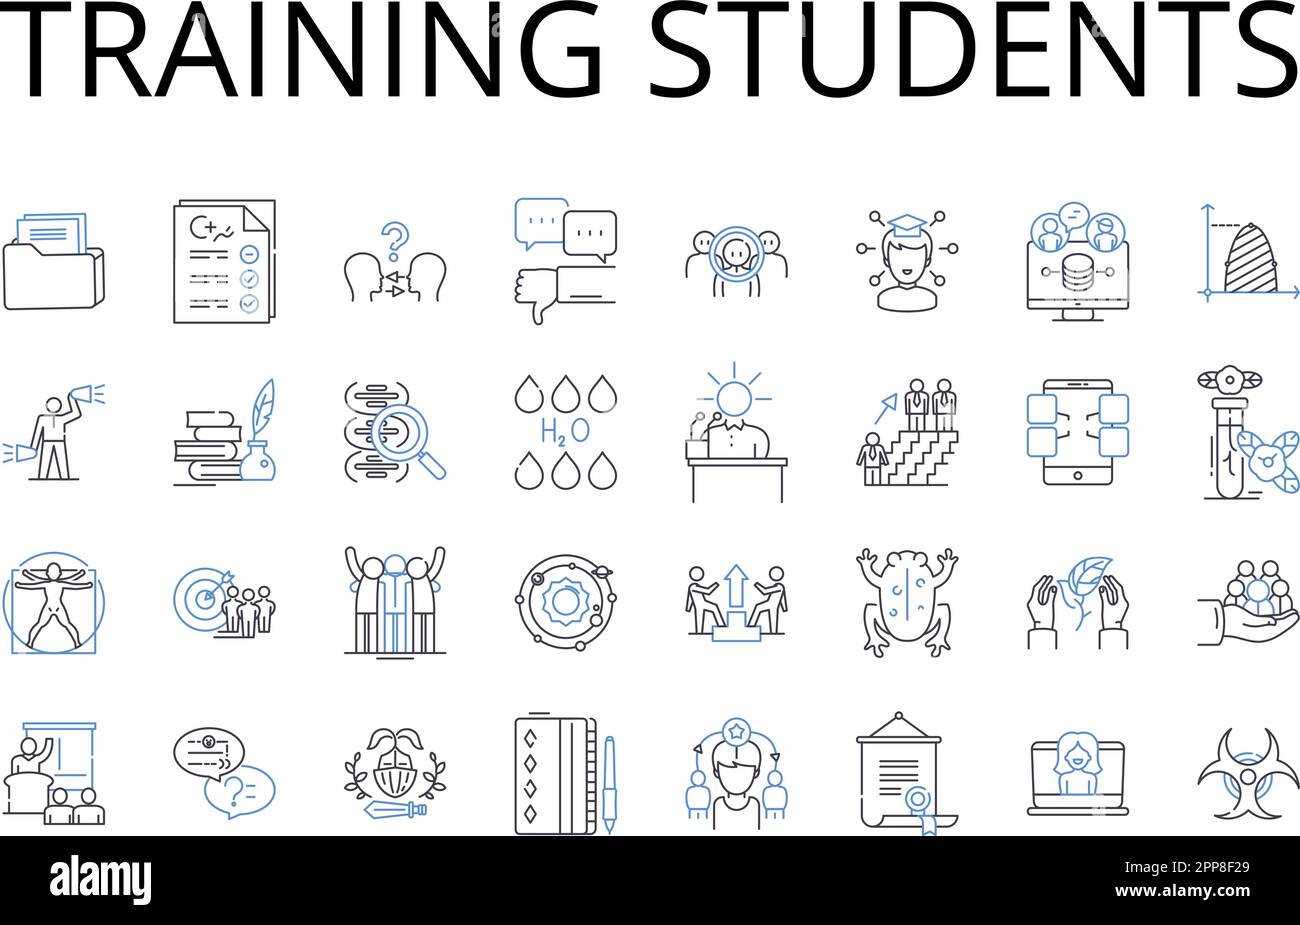 Training students line icons collection. Educating individuals, Teaching pupils, Coaching learners, Instructing scholars, Guiding trainees, Nurturing Stock Vector